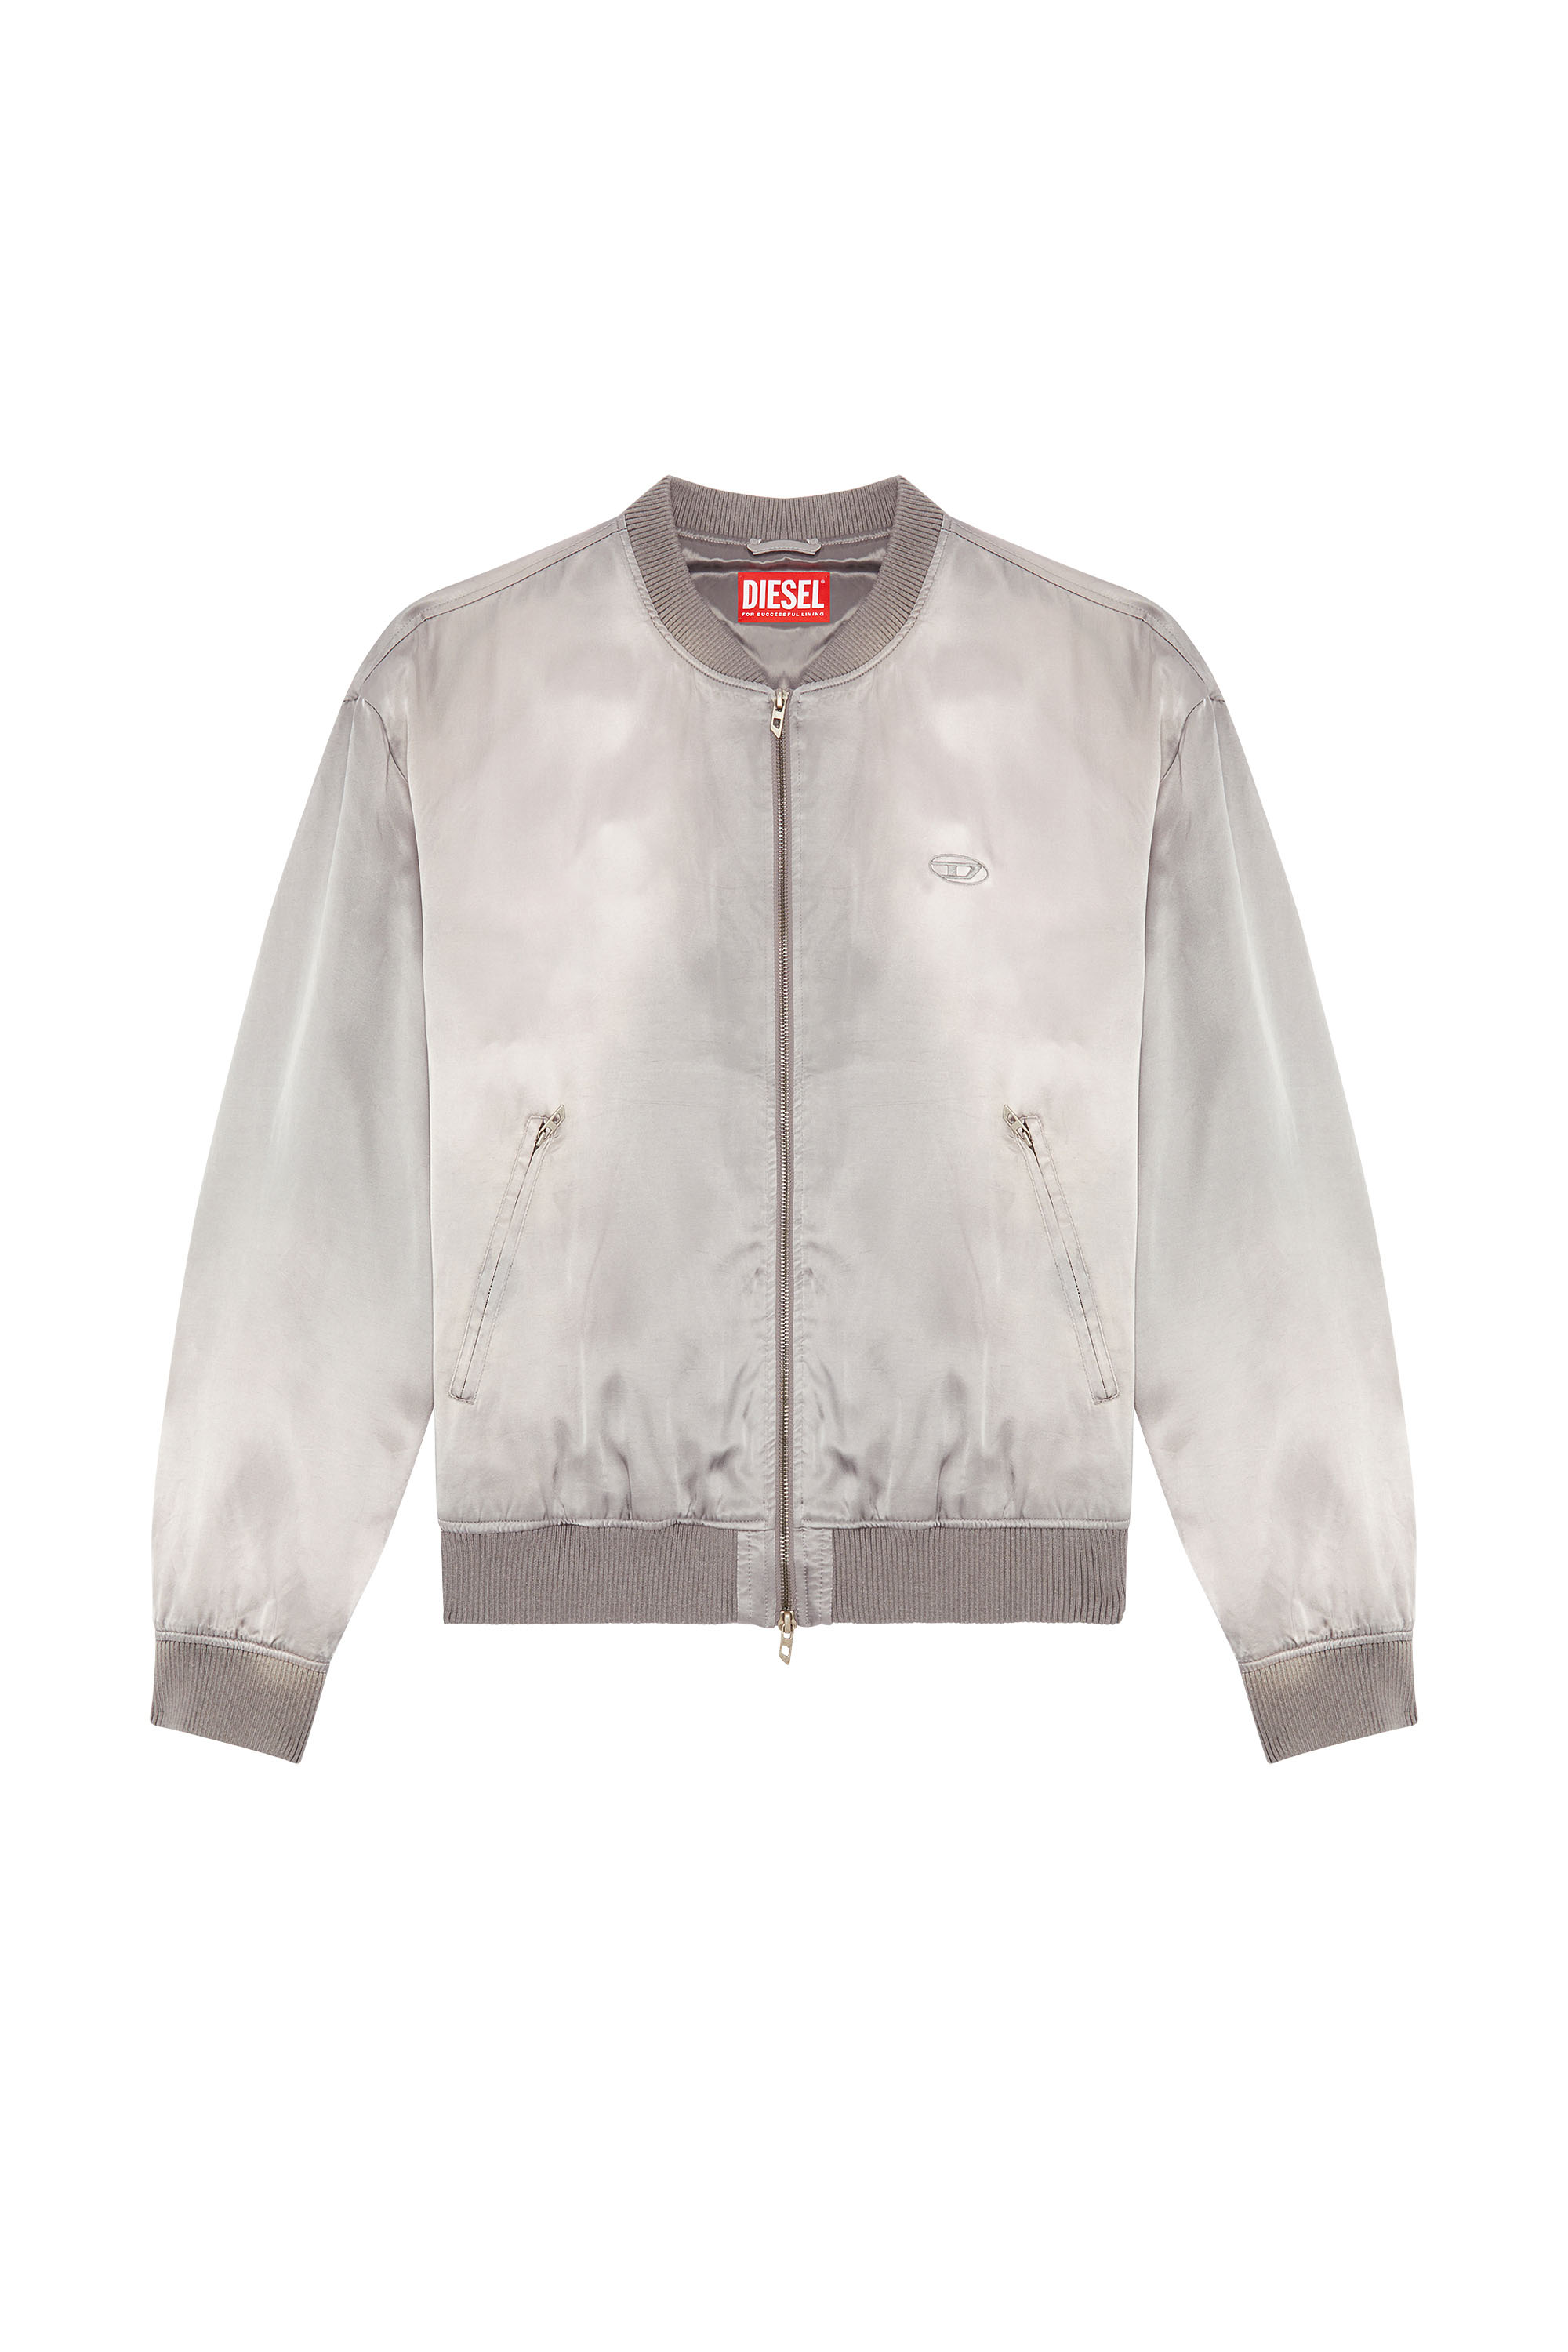 Diesel - J-MARTEX, Man Satin bomber jacket with faded effect in Grey - Image 3